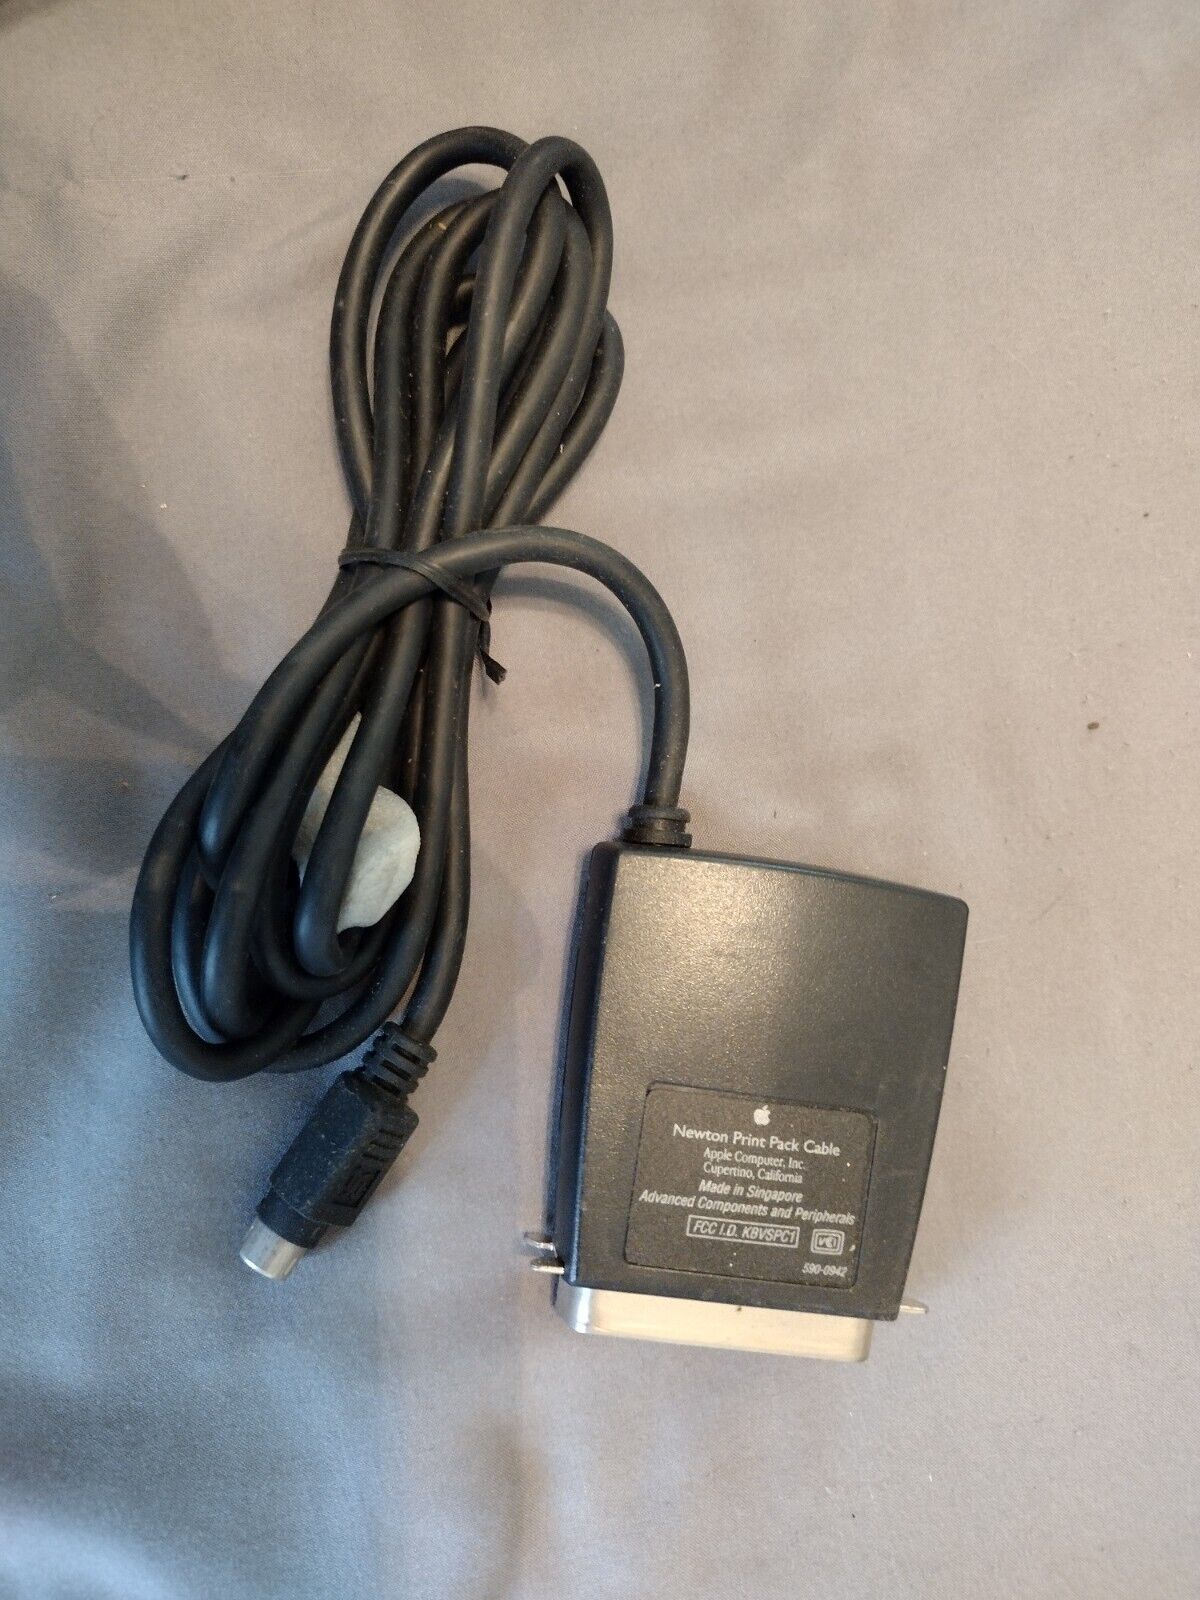 Newton Print Pack Cable Cord Vintage Apple Message Pad PDA Genuine 590-0942